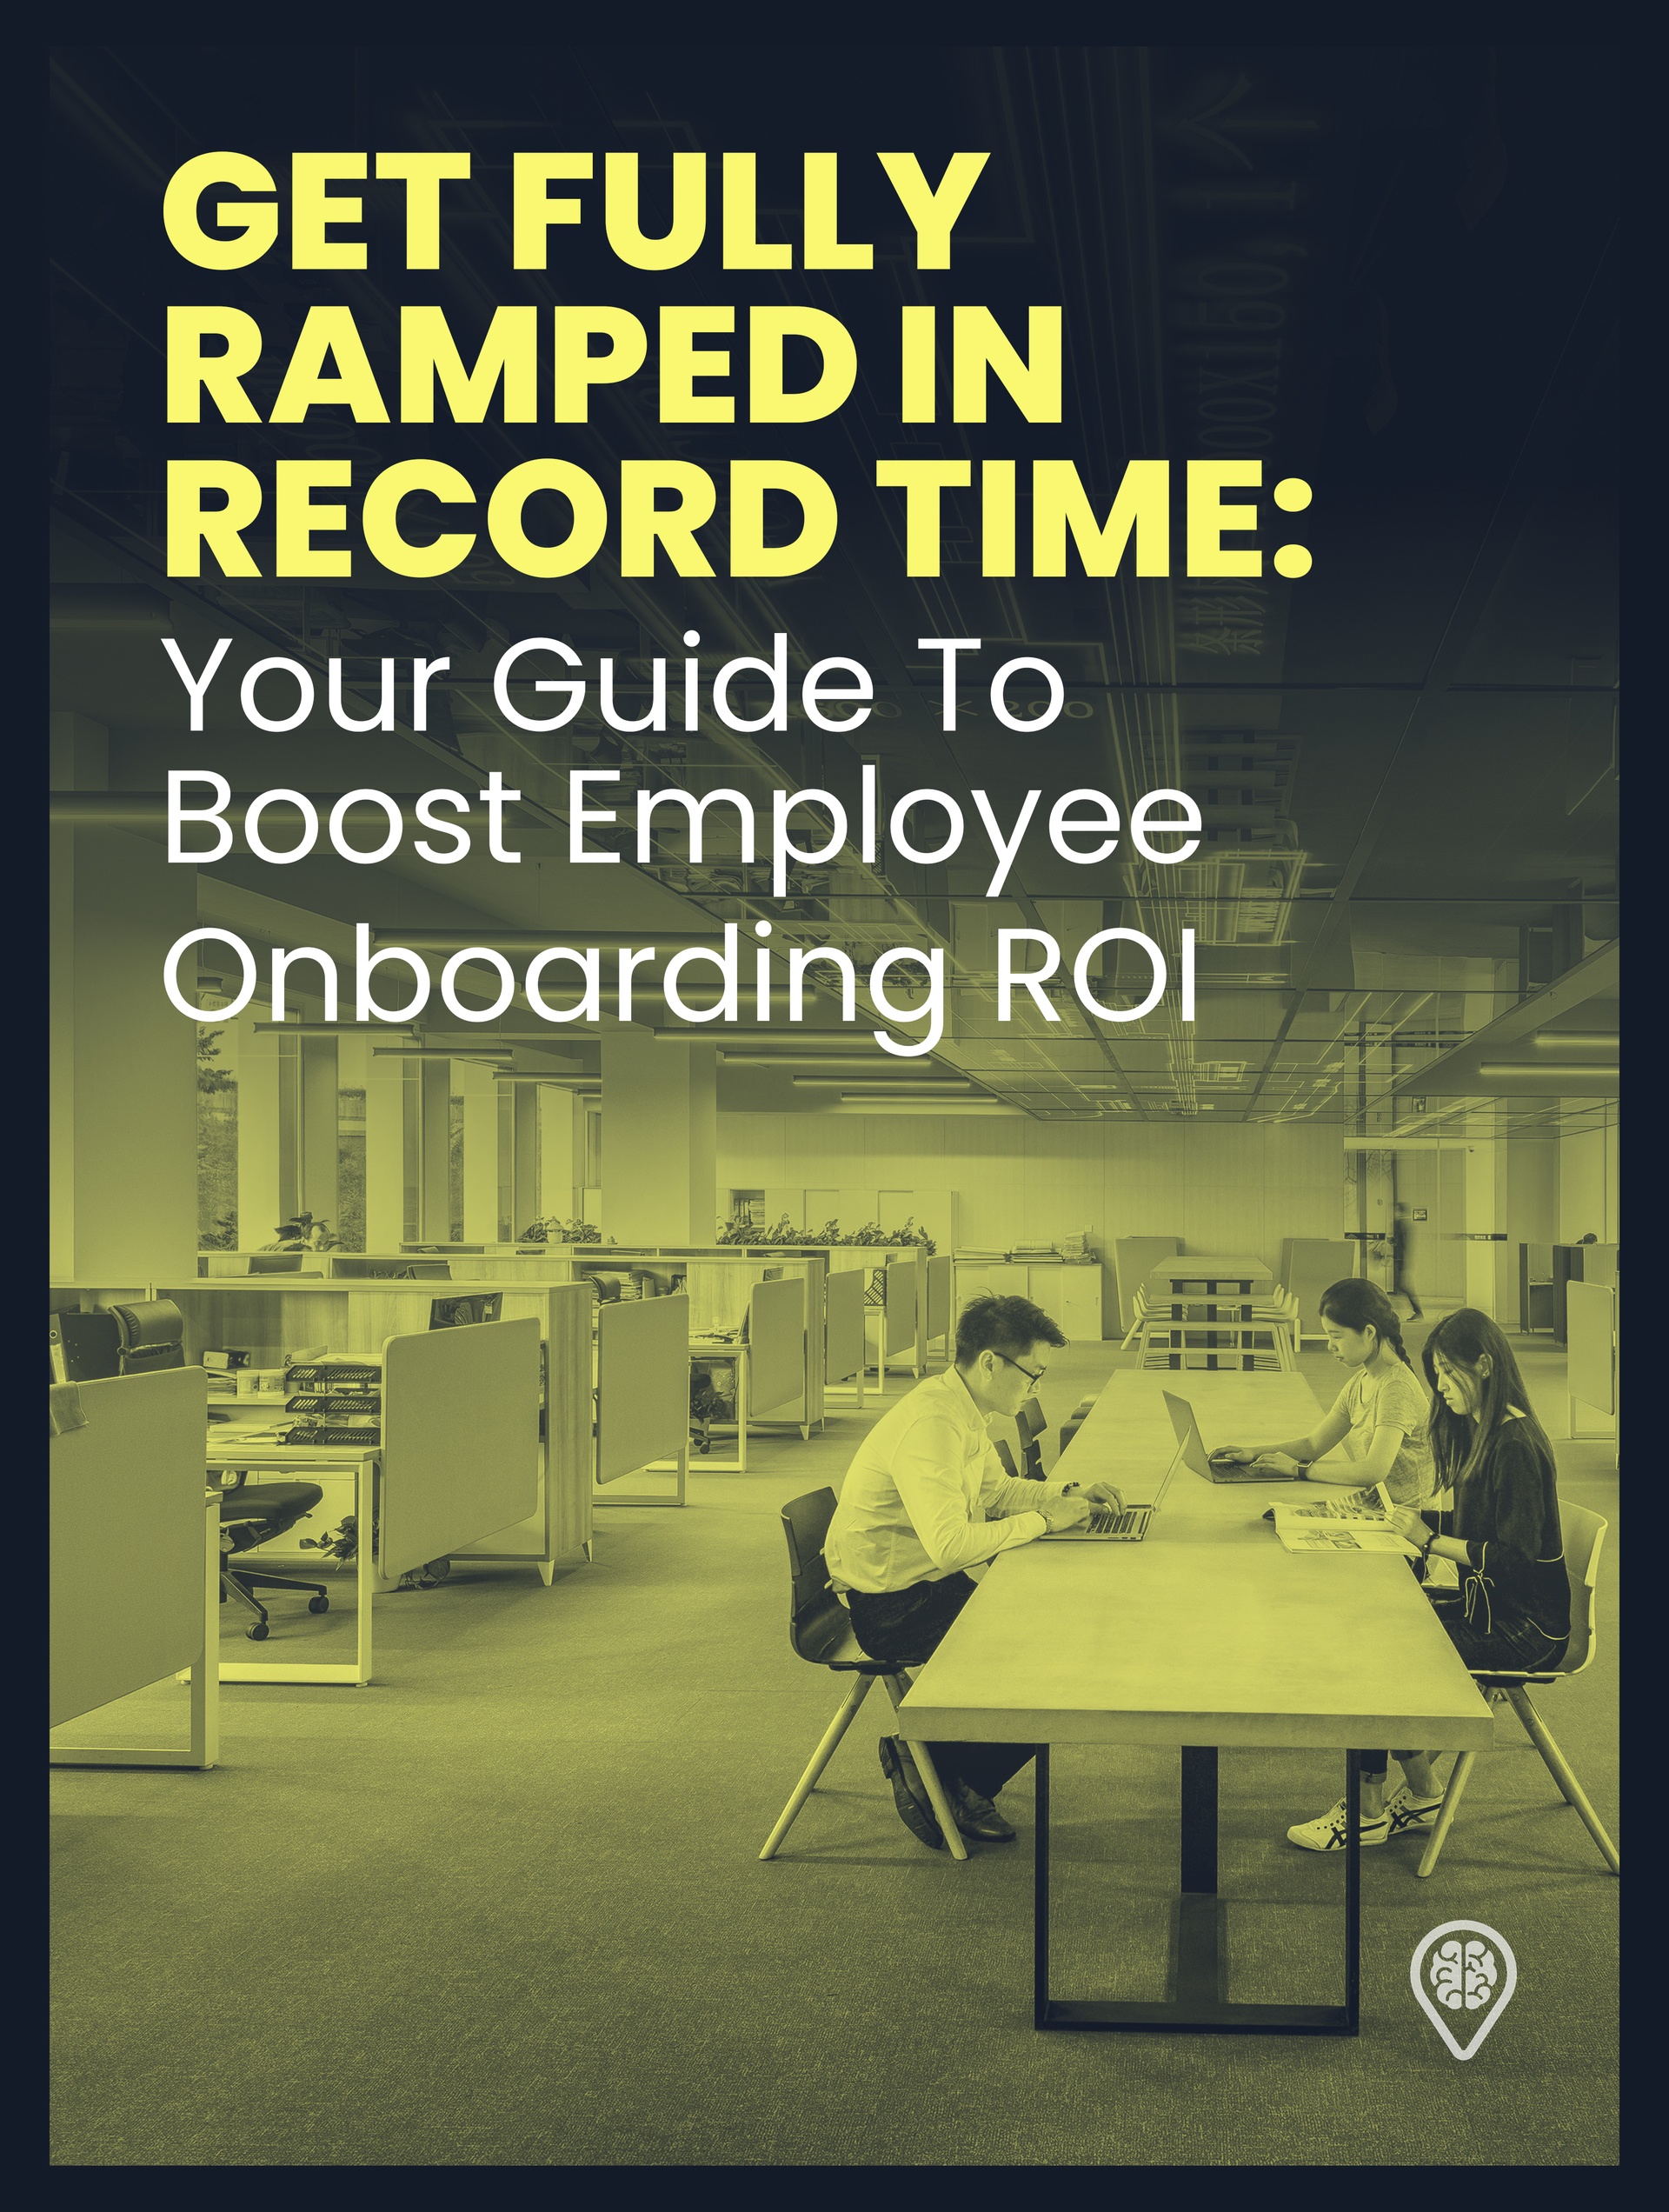 Employee Onboarding Challenges That Lower eLearning ROI